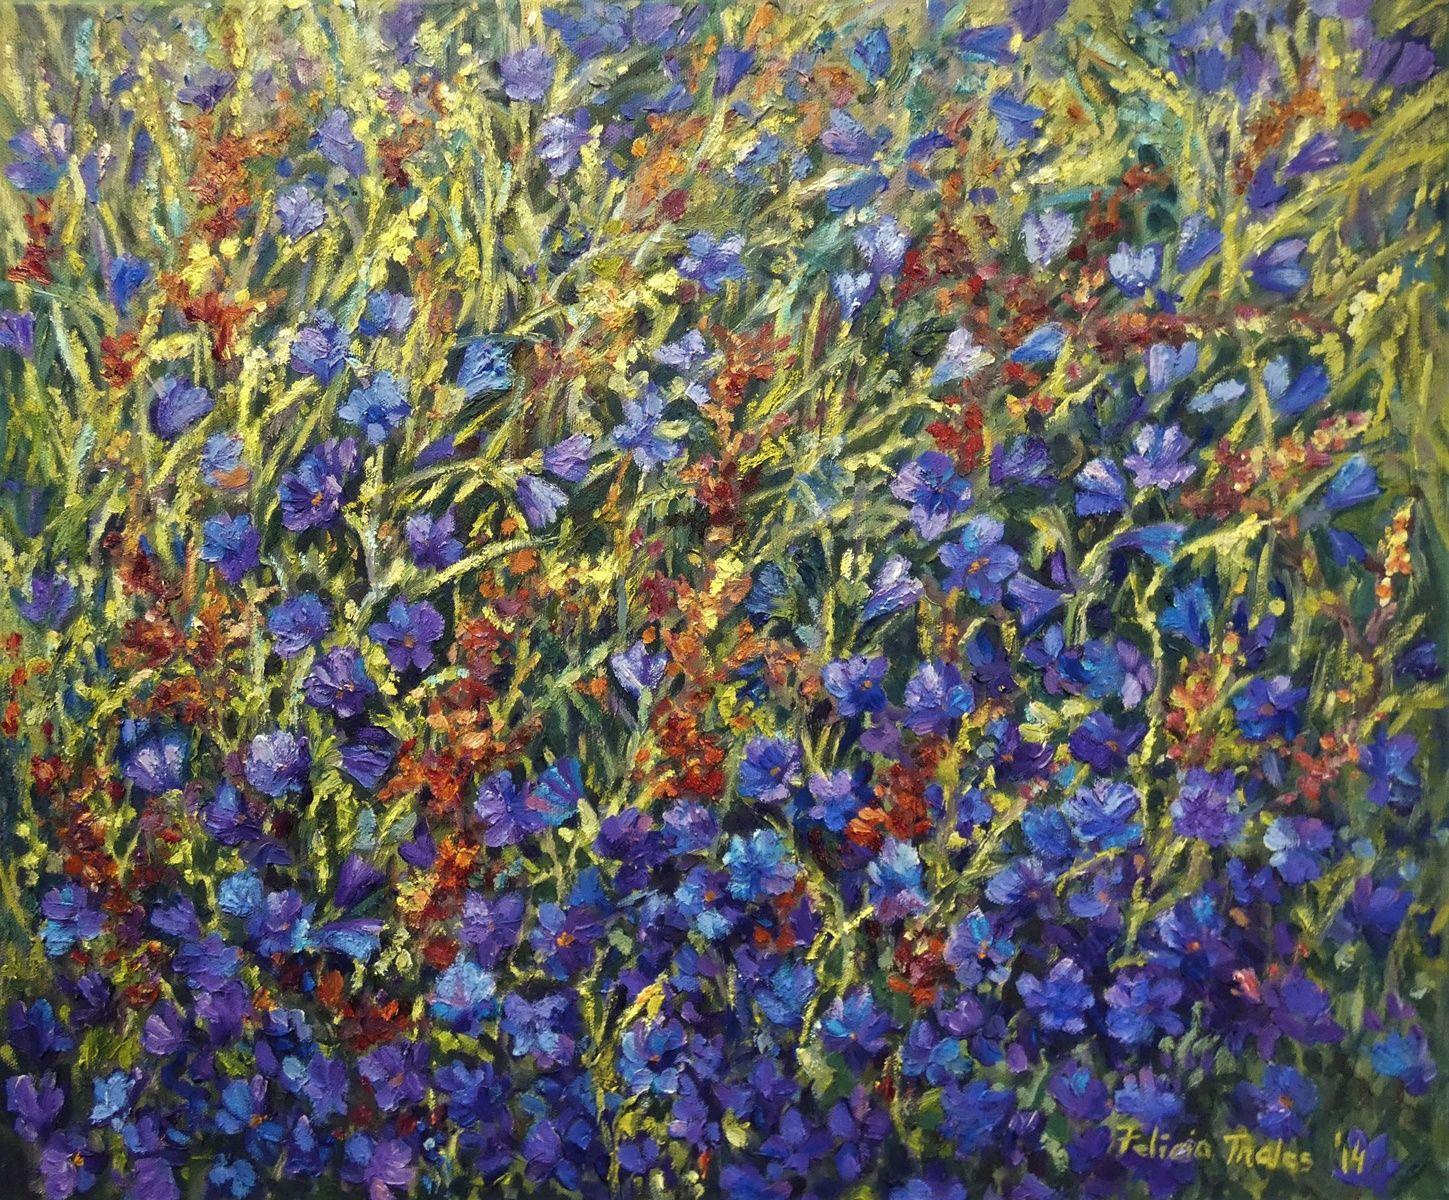 My painting is about Spring, Spring is about Flowers, Strong Colors and Joy. It's like traveling in a dream and waking up suspended in the light. :: Painting :: Impressionist :: This piece comes with an official certificate of authenticity signed by